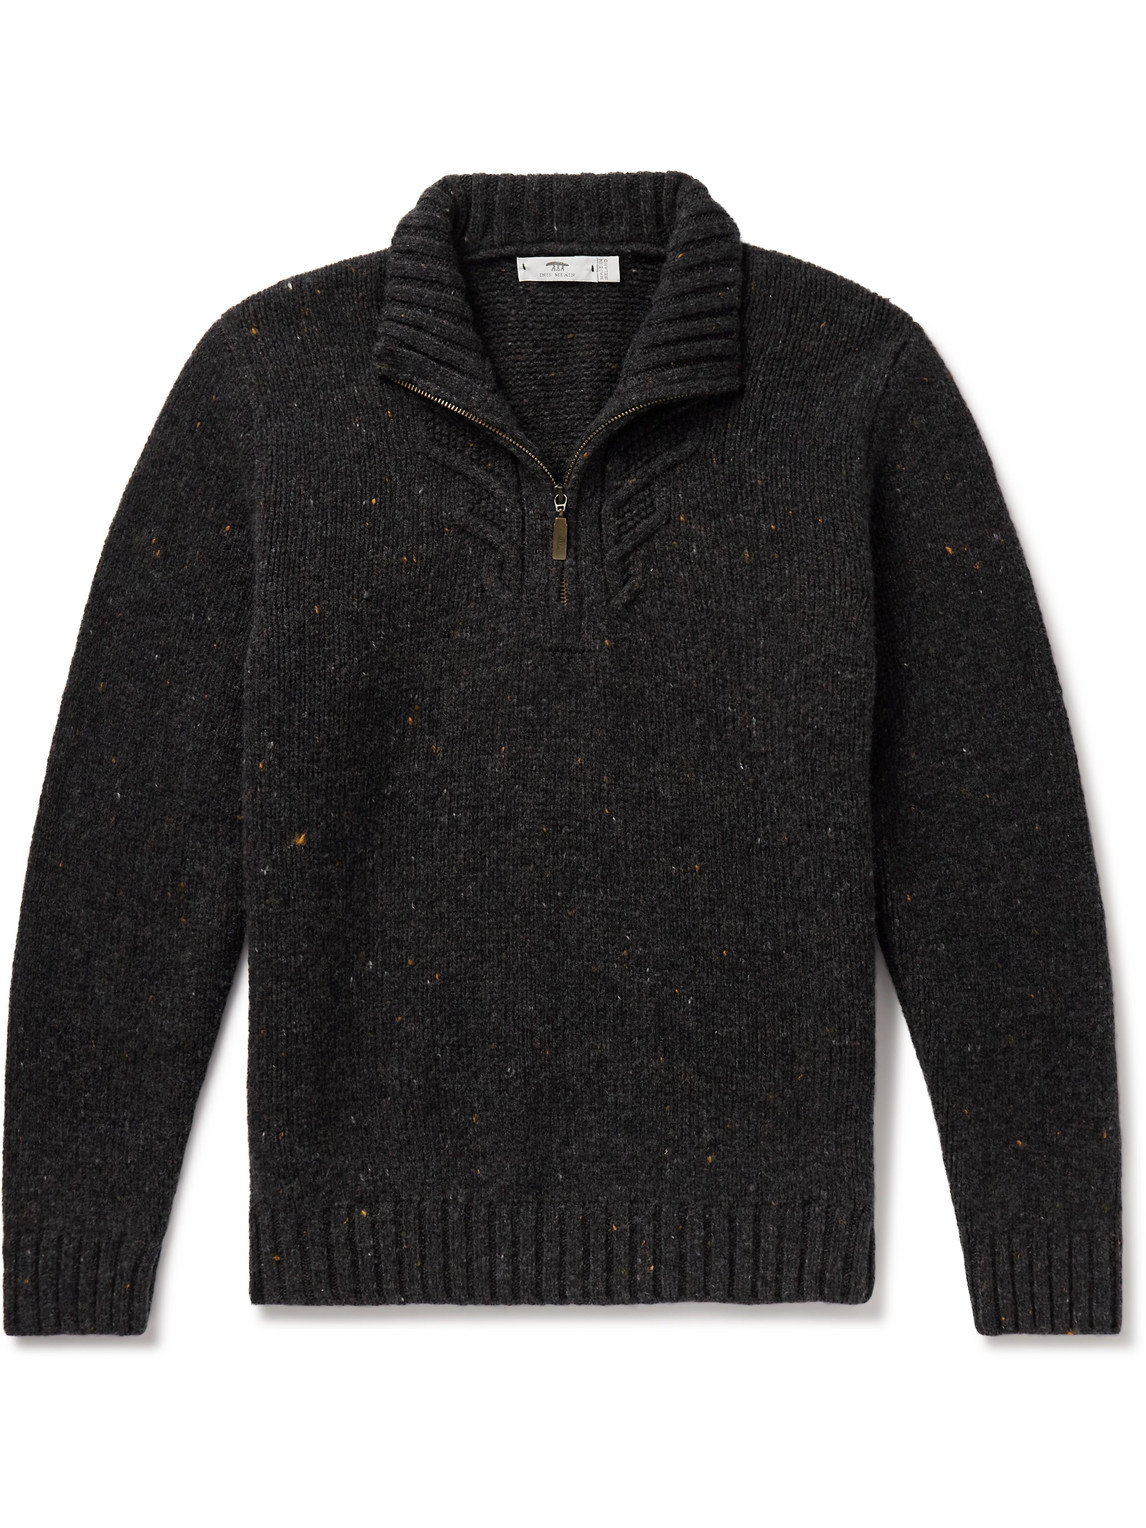 Inis Meáin Rowan Donegal Merino Wool and Cashmere-Blend Half-Zip Sweater